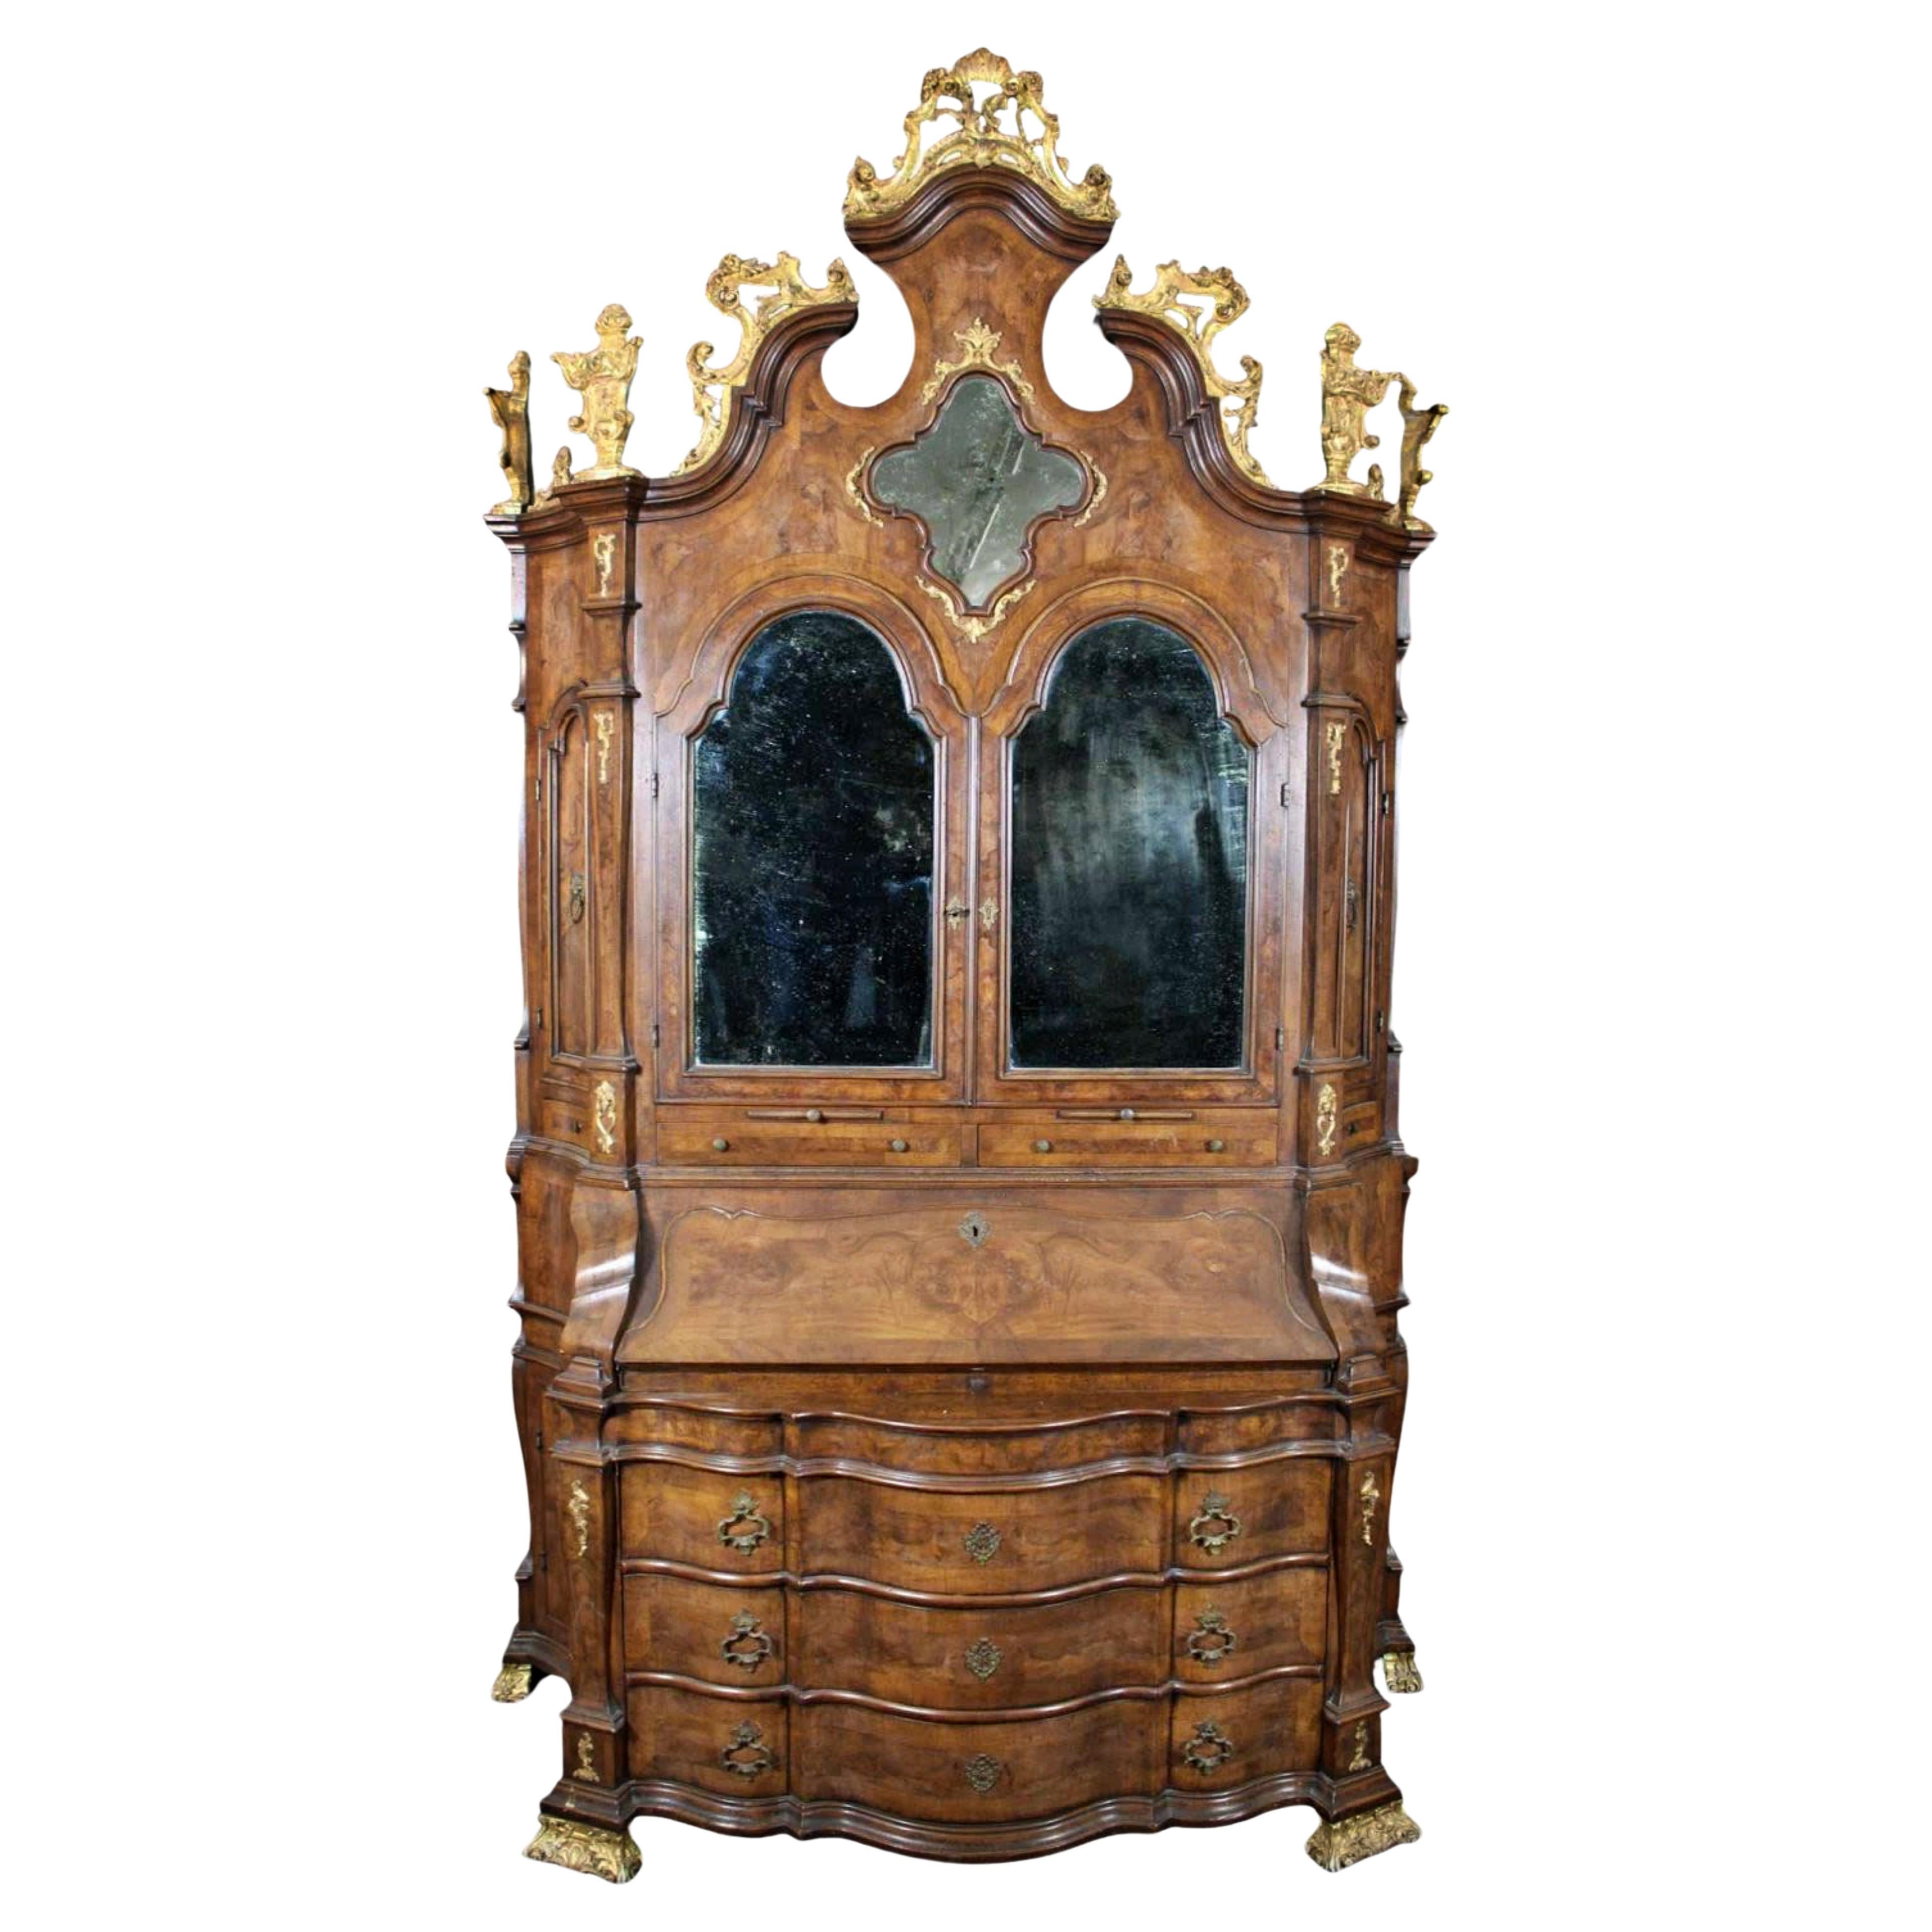 MAGNIFICENT ELEGANT ITALIAN VENETIAN TRUMEAU 19th Century

in walnut briar, enriched with 19th Century Venetian craftsmanship gilded wood carvings in pure gold
h 280 x 165 x 75 cm
good general condition